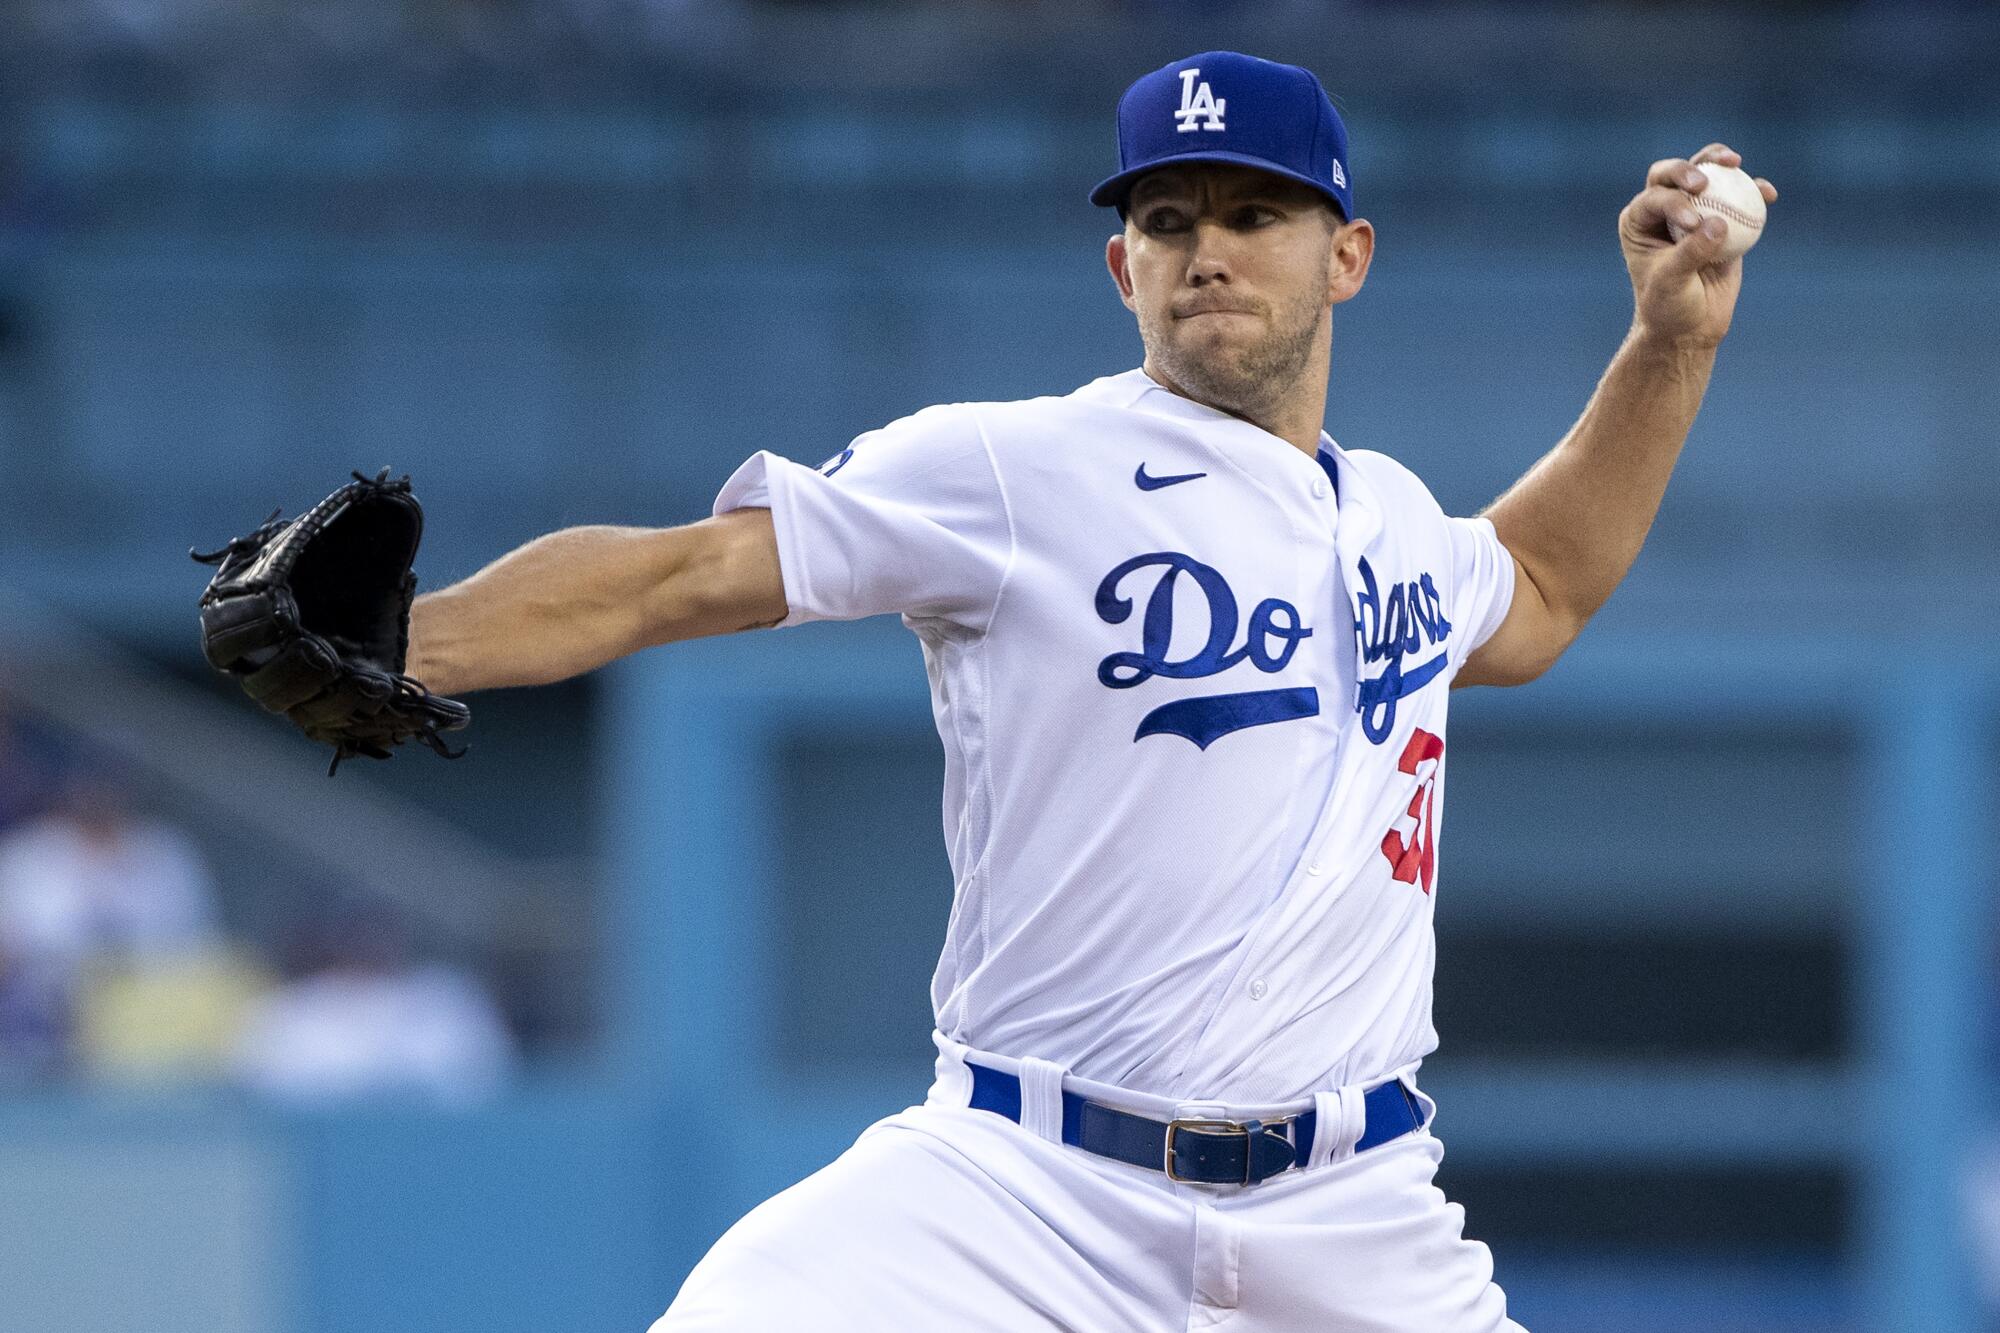 Dodgers starting pitcher Tyler Anderson delivers against the Miami Marlins on Friday night at Dodger Stadium.